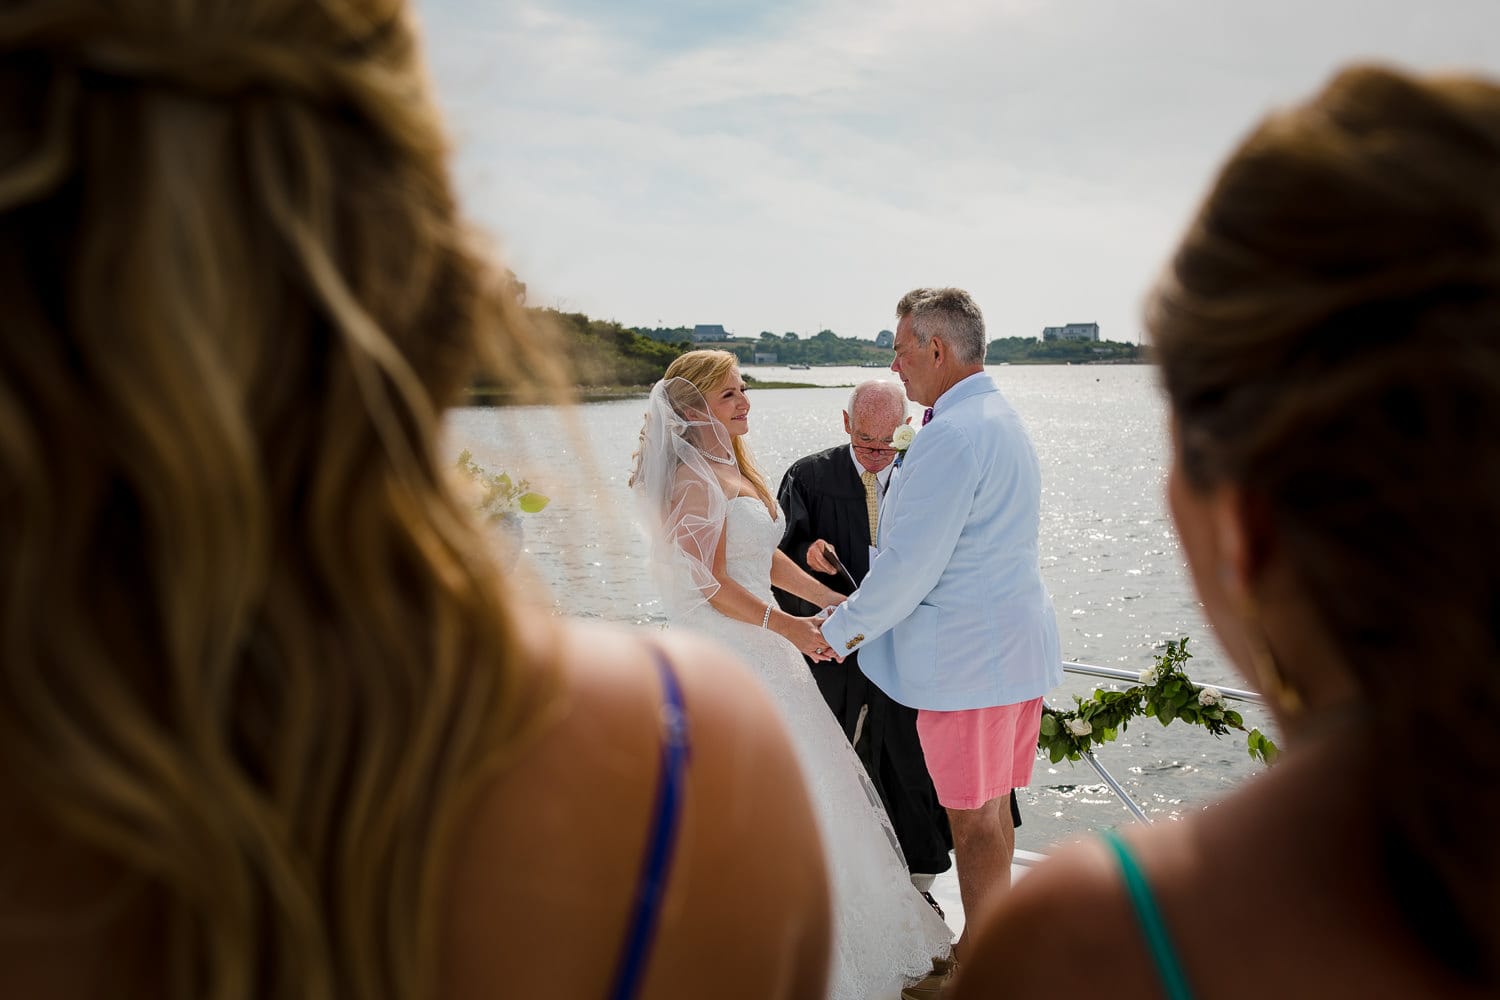 Two guests watch as the bride and groom get married on the bow of their boat during their block island wedding